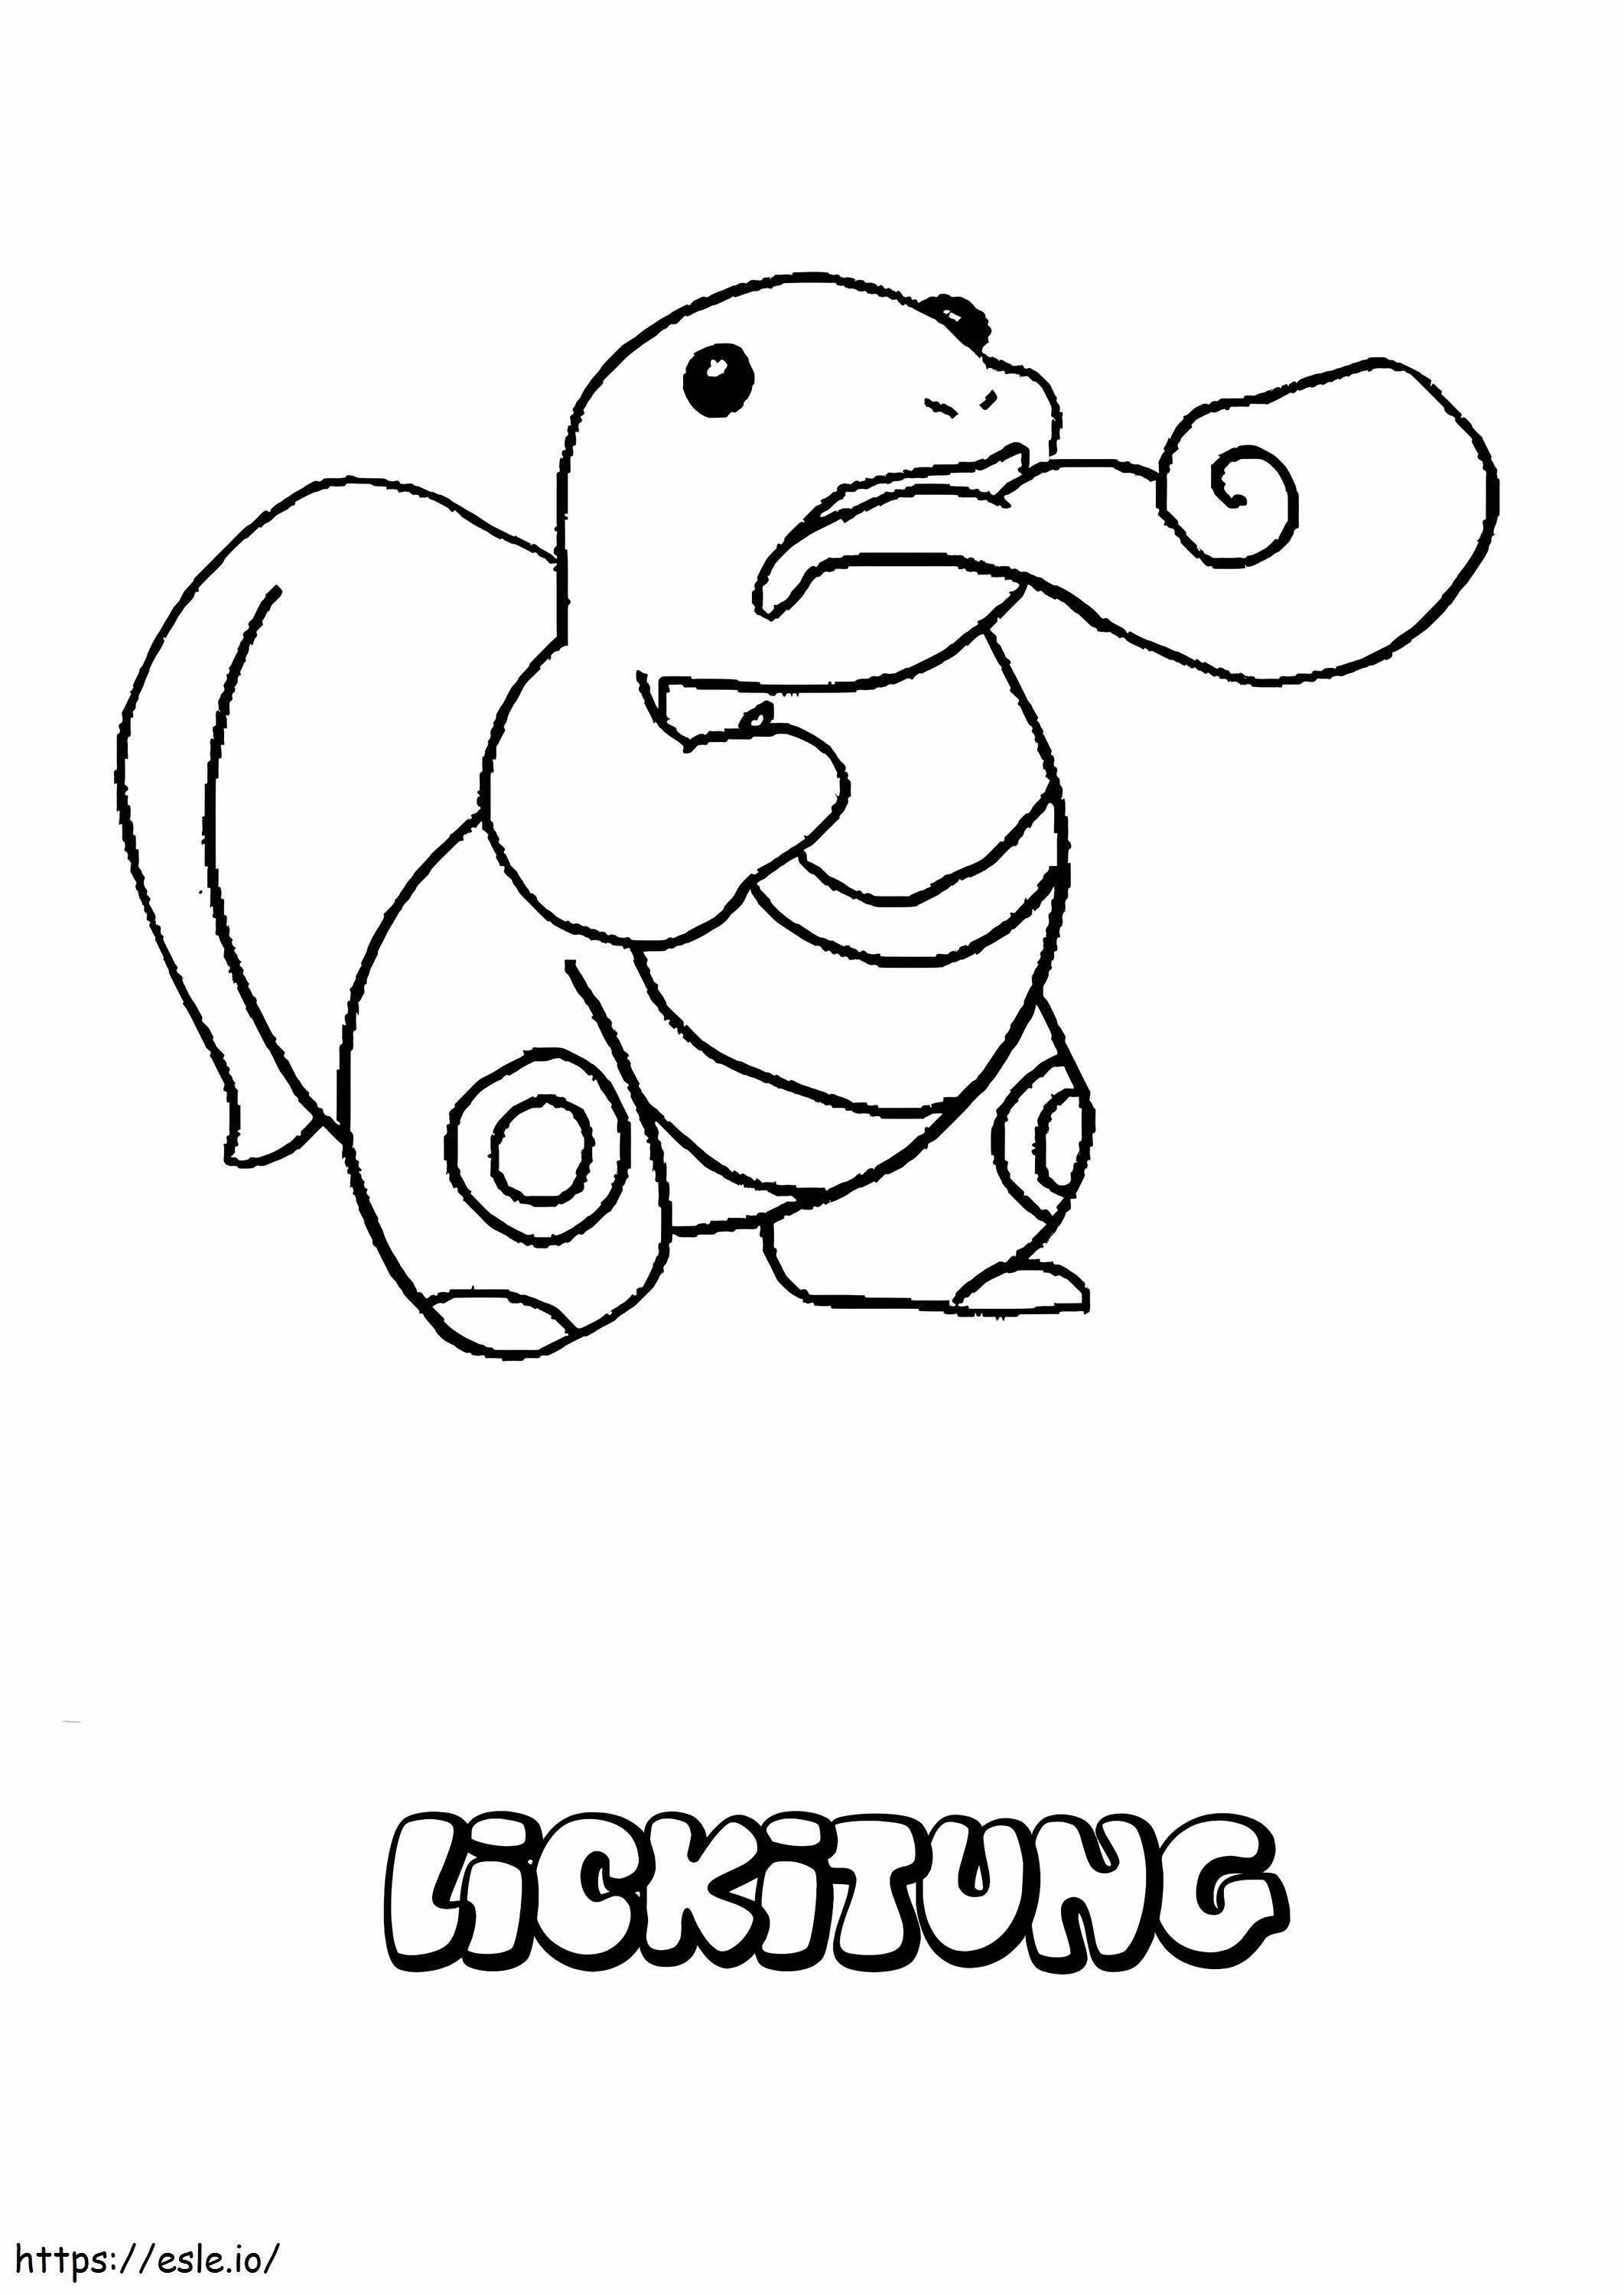 Lickitung Pokemon Gen 1 coloring page